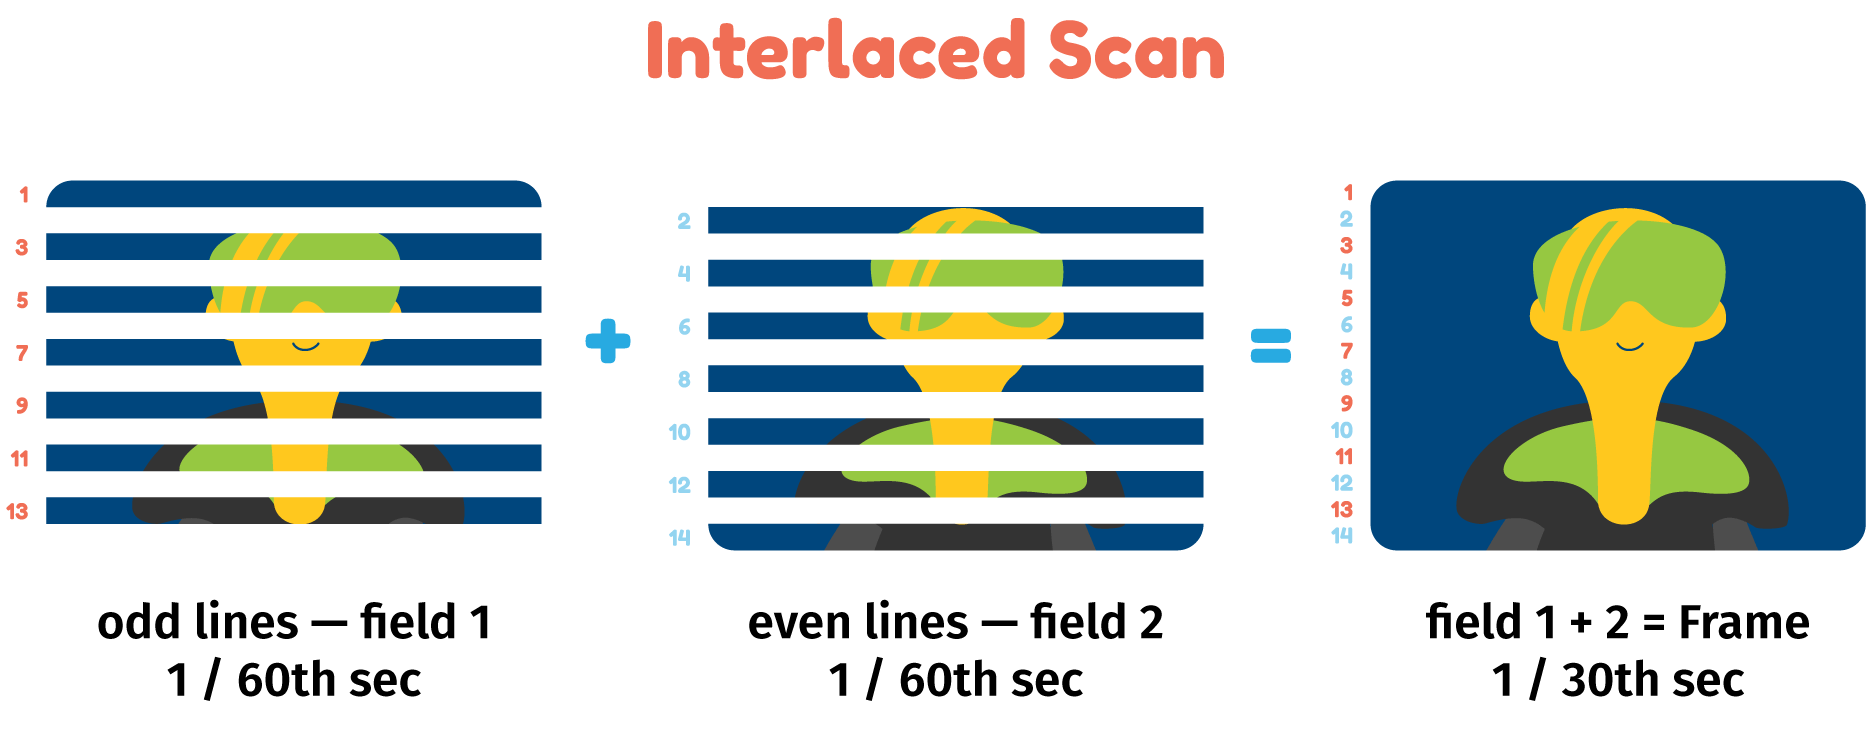 How interlaced scan works